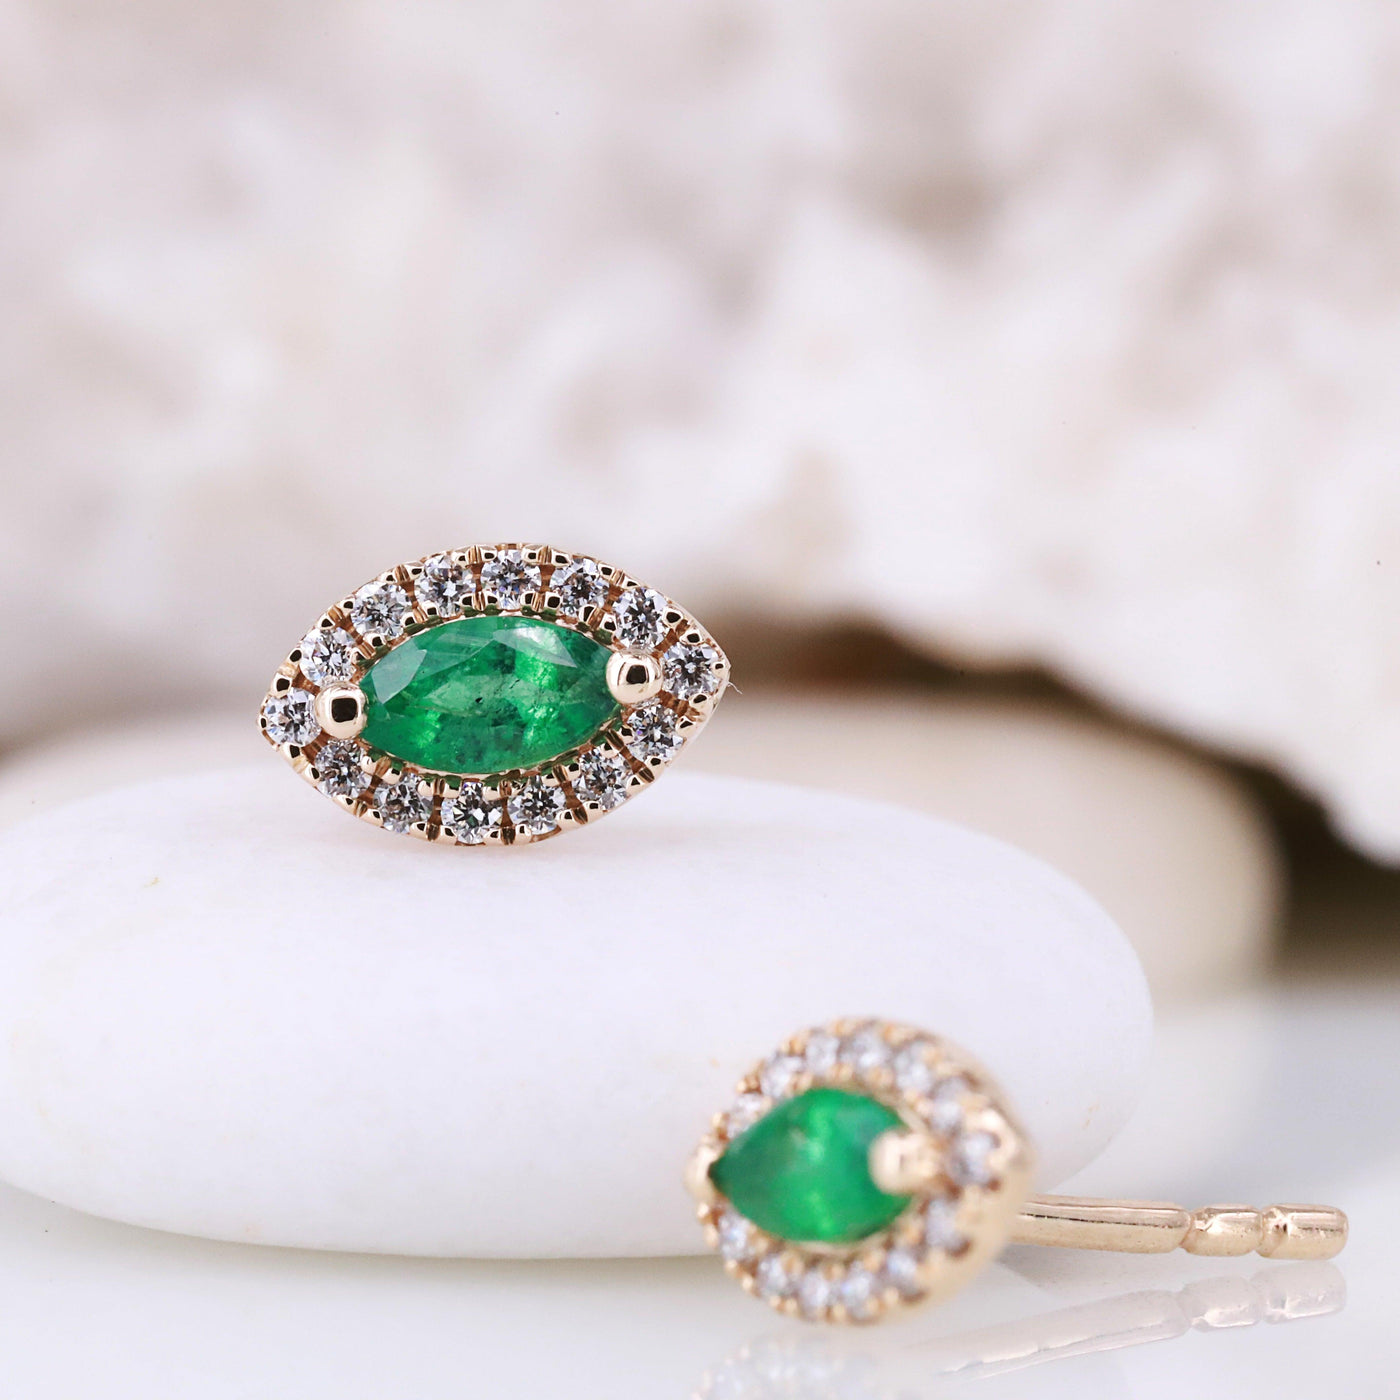 Sparkle in Style with Our Emerald Marquise Diamond Earrings - Shop Now for Timeless Elegance and Unmatched Beauty! Emerald Marquise Diamond - Rubysta